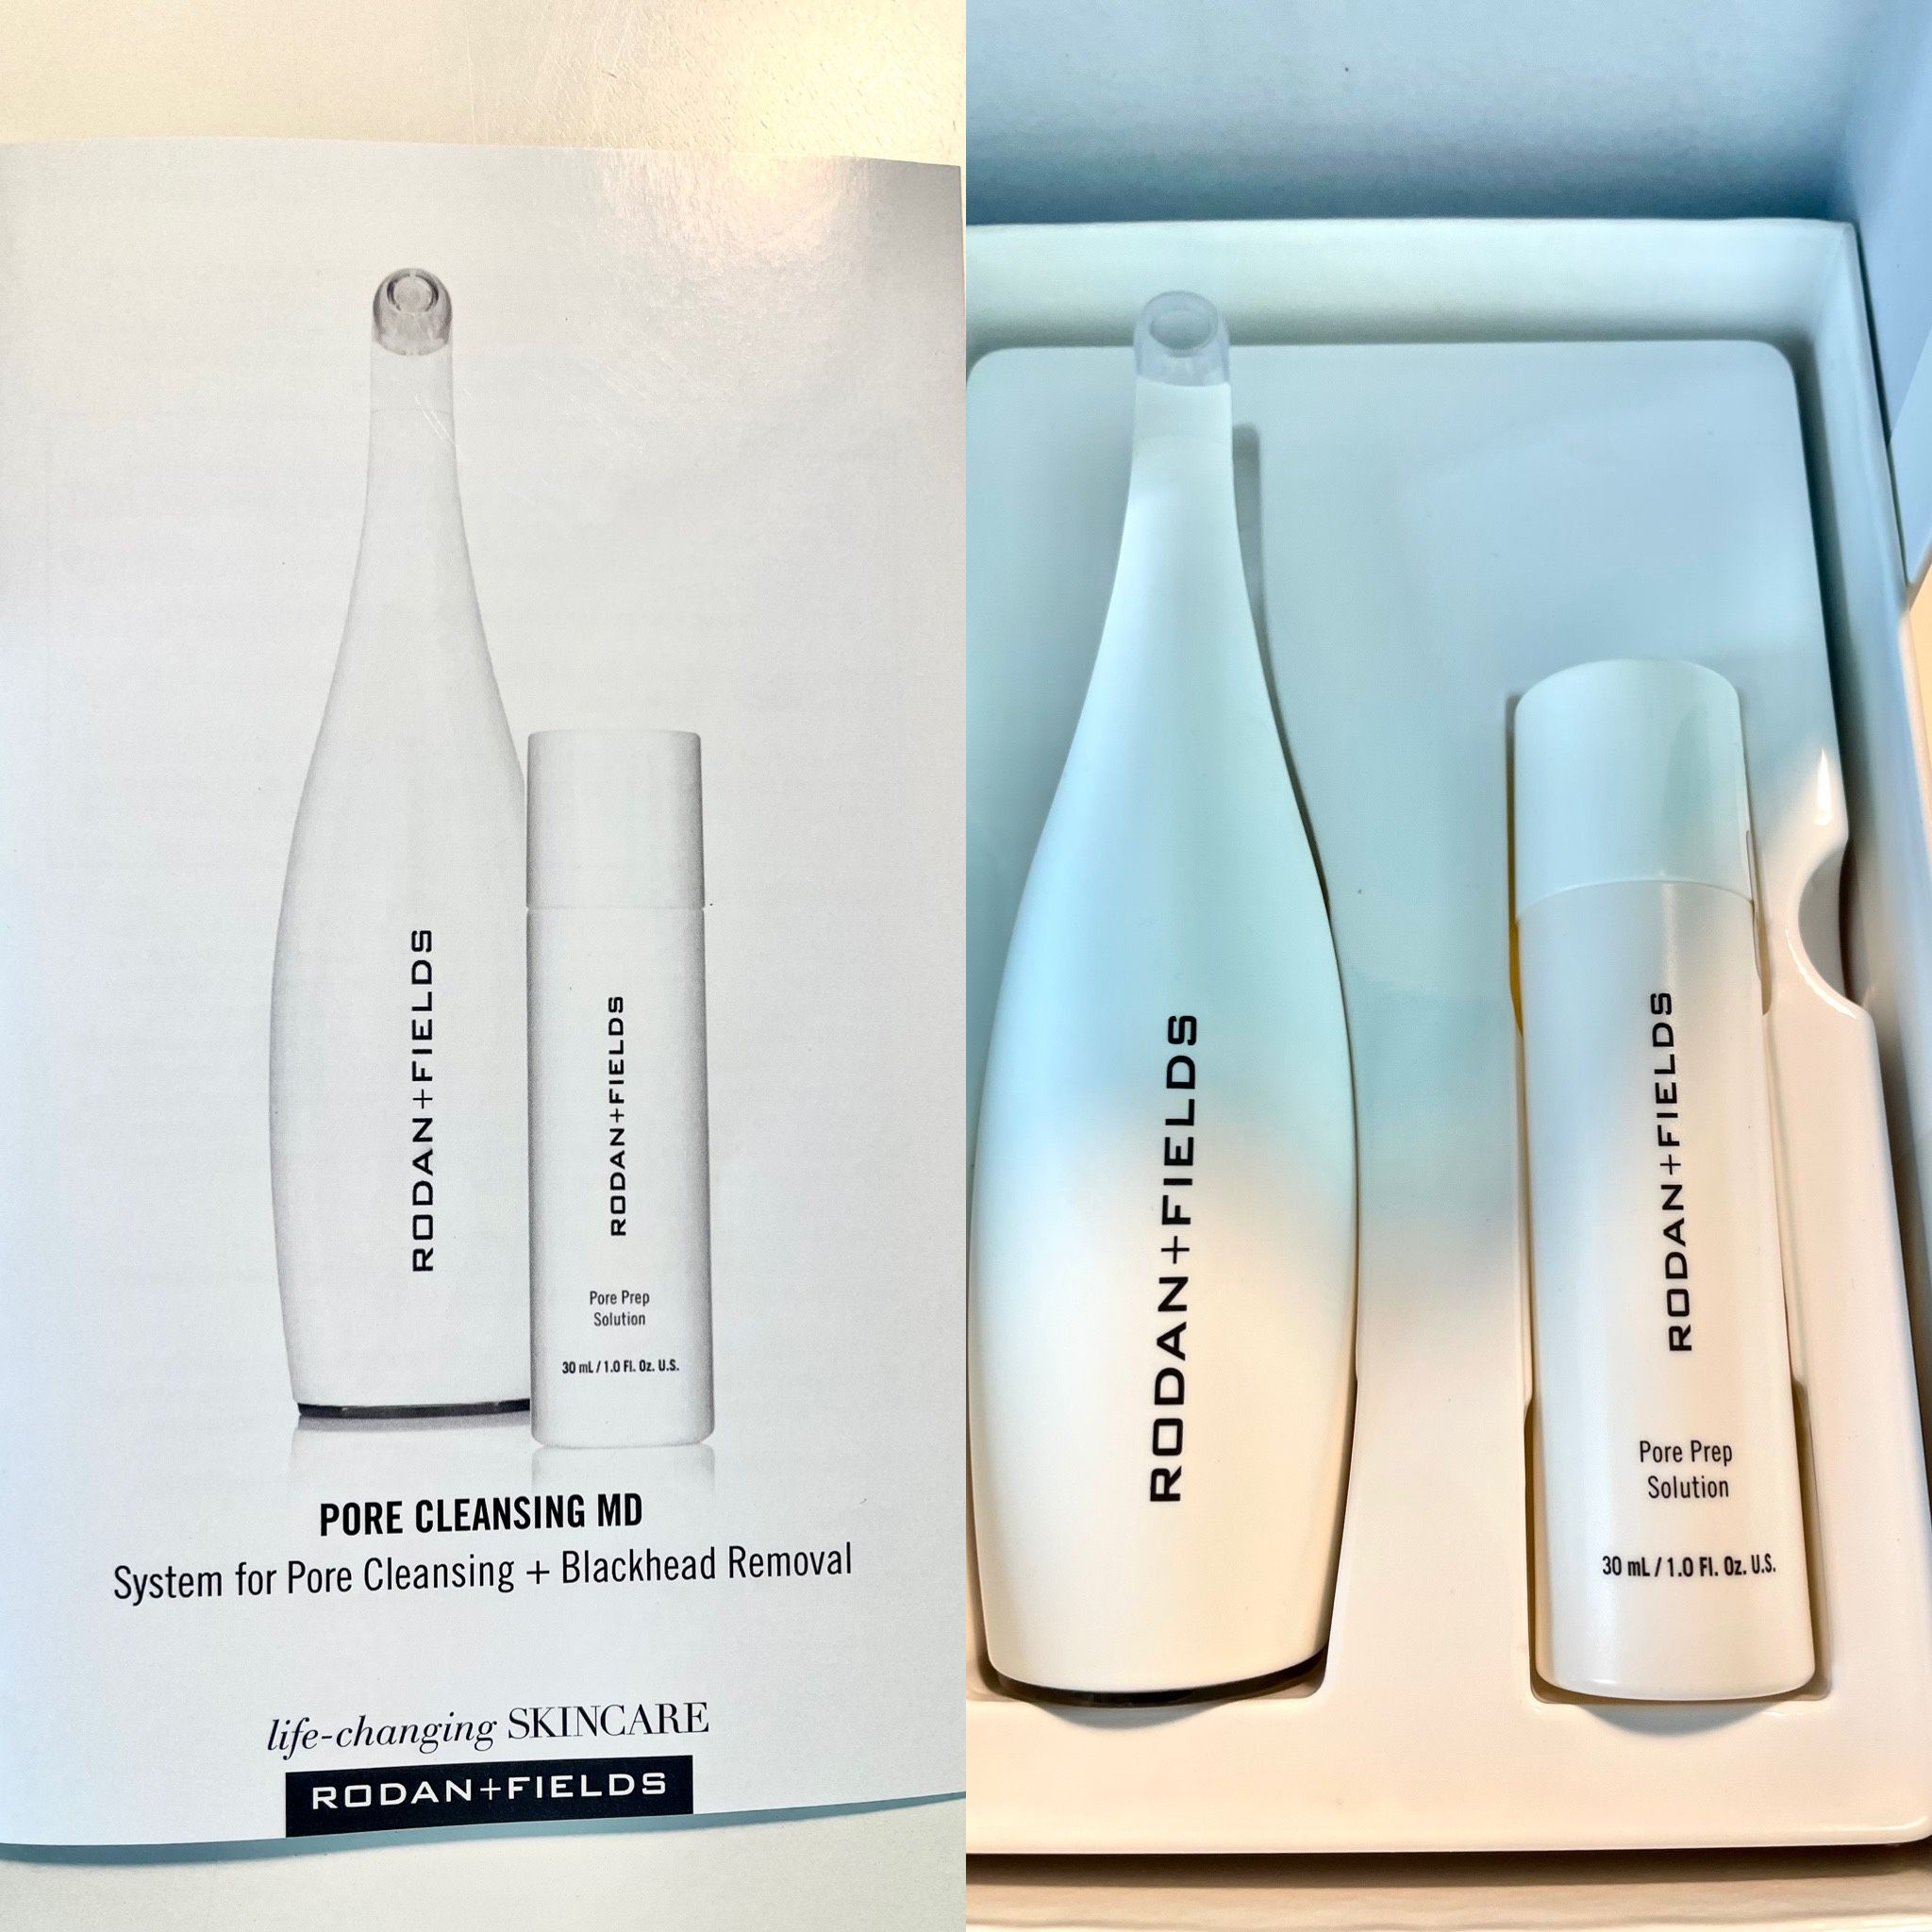 Pore Cleansing MD system W Extra Tips - By Rodan+Fields